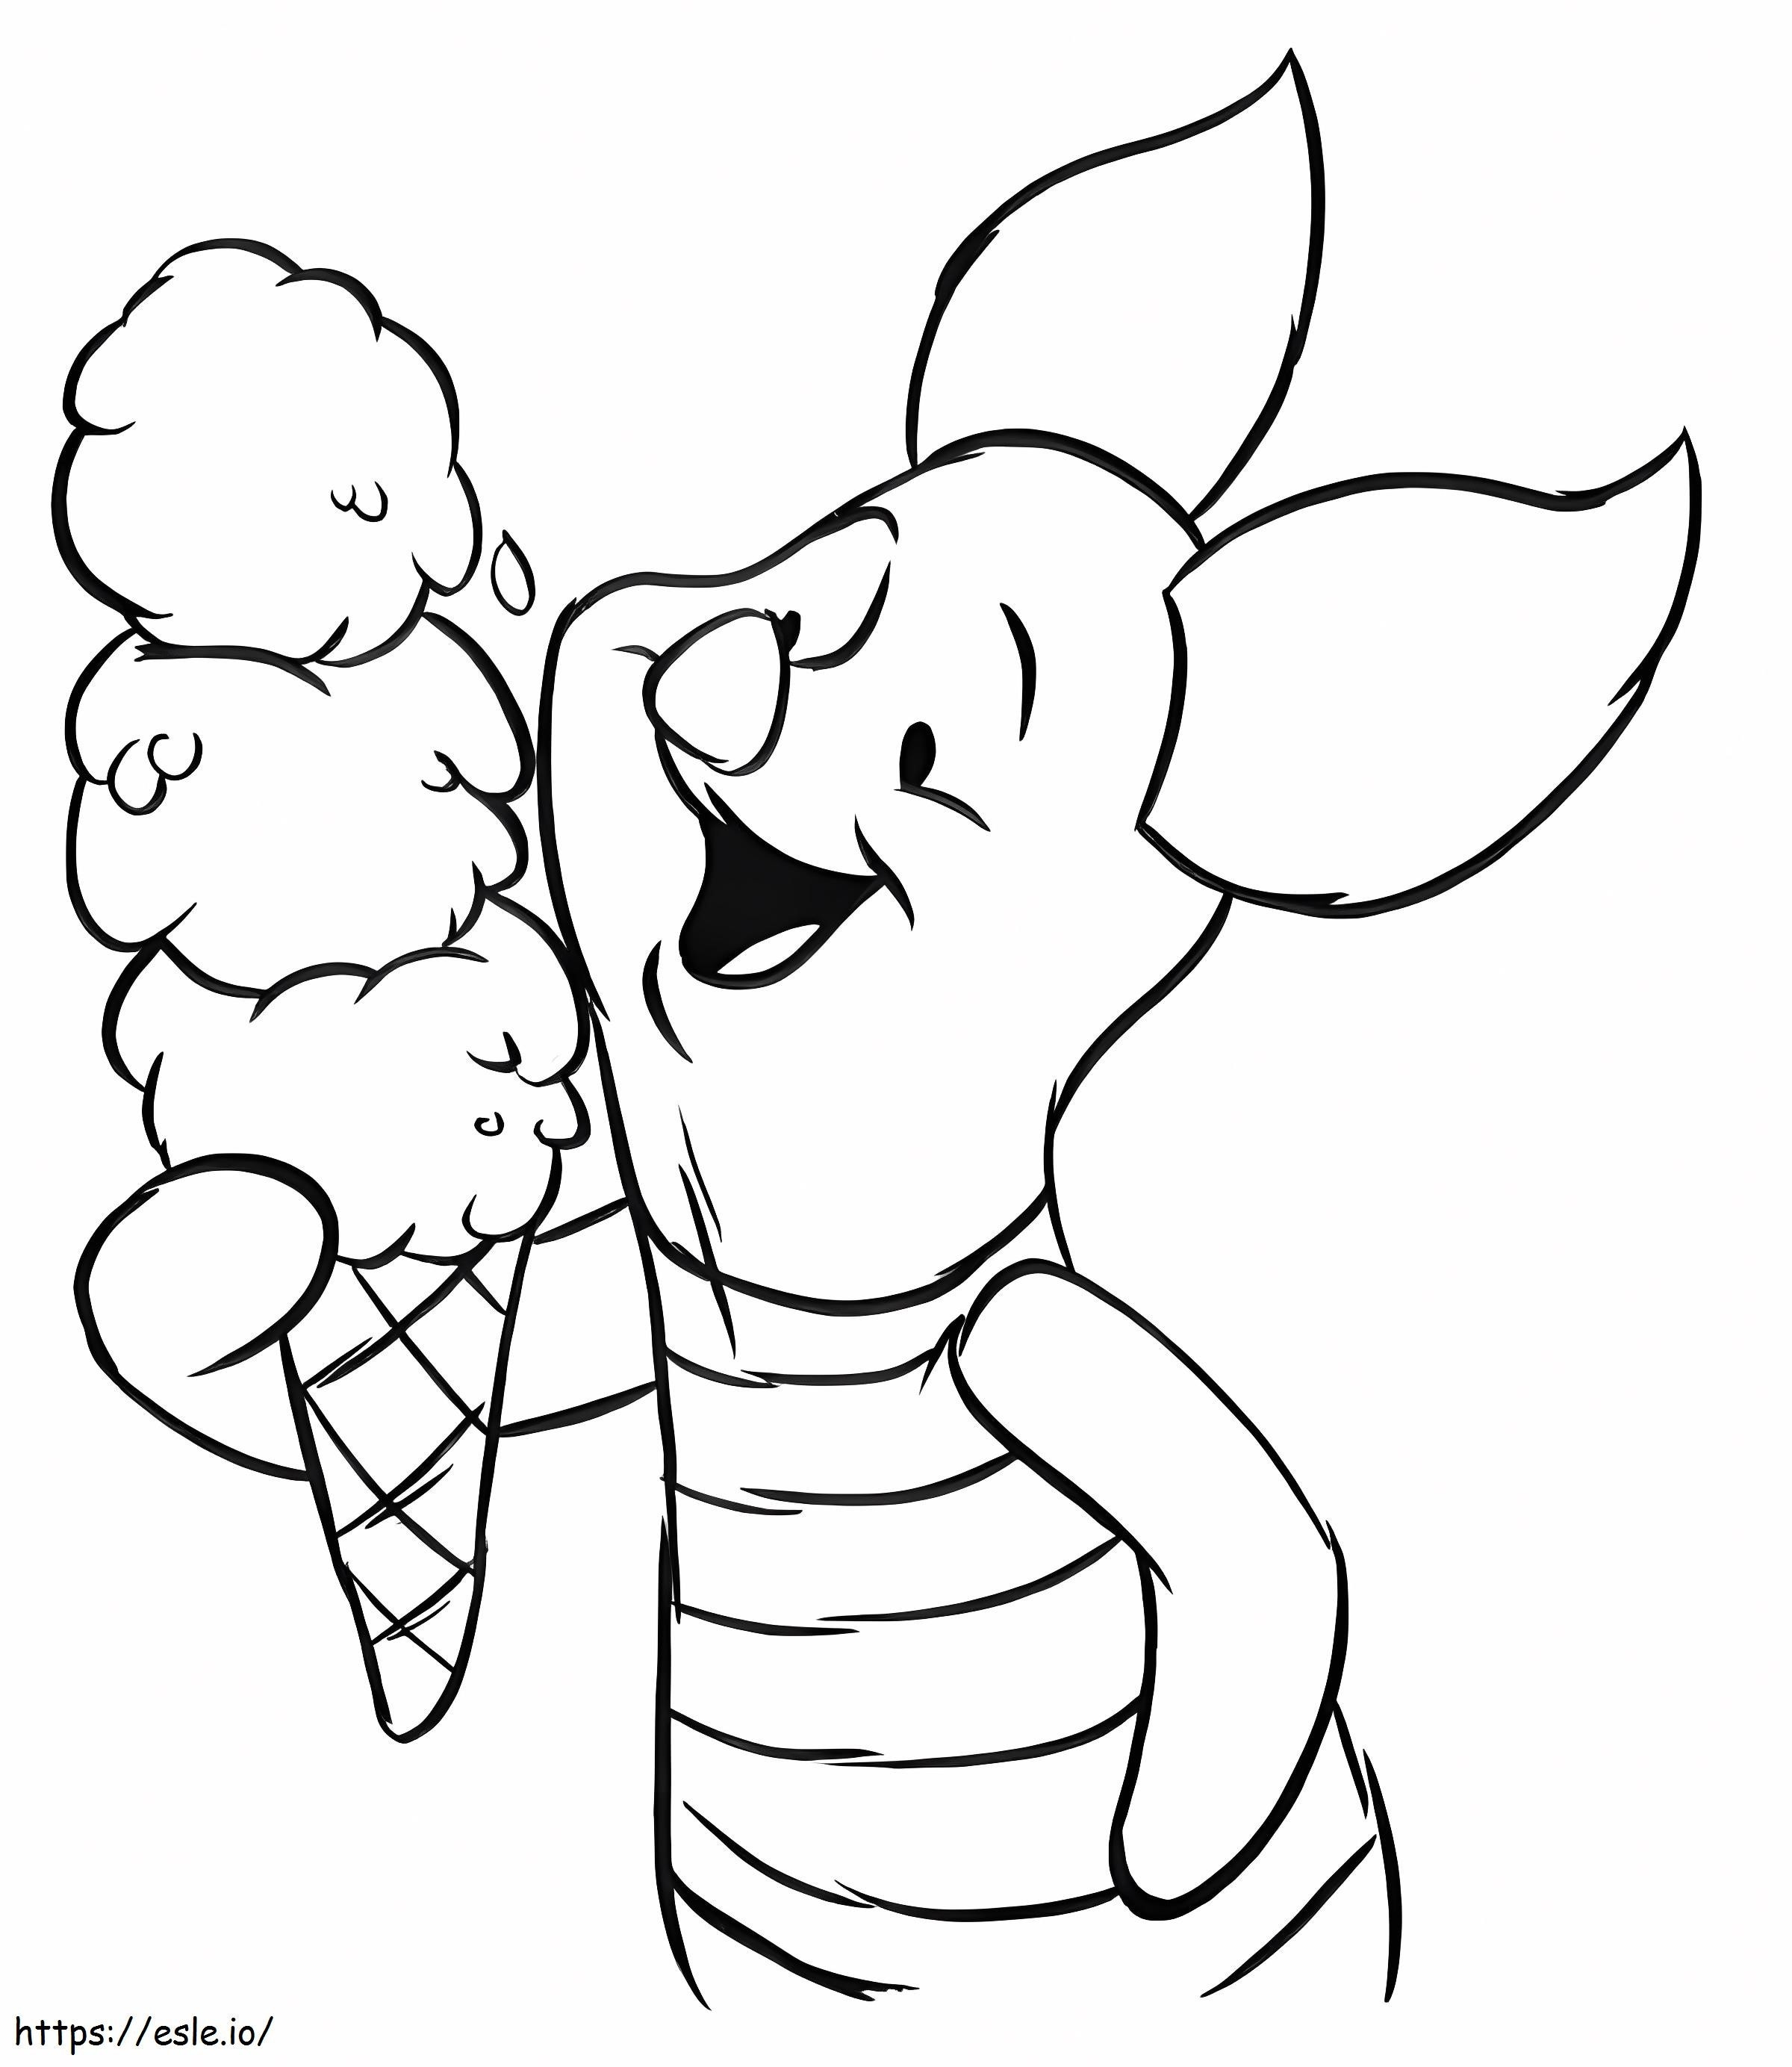 Piggy Pig Eating Ice Cream coloring page